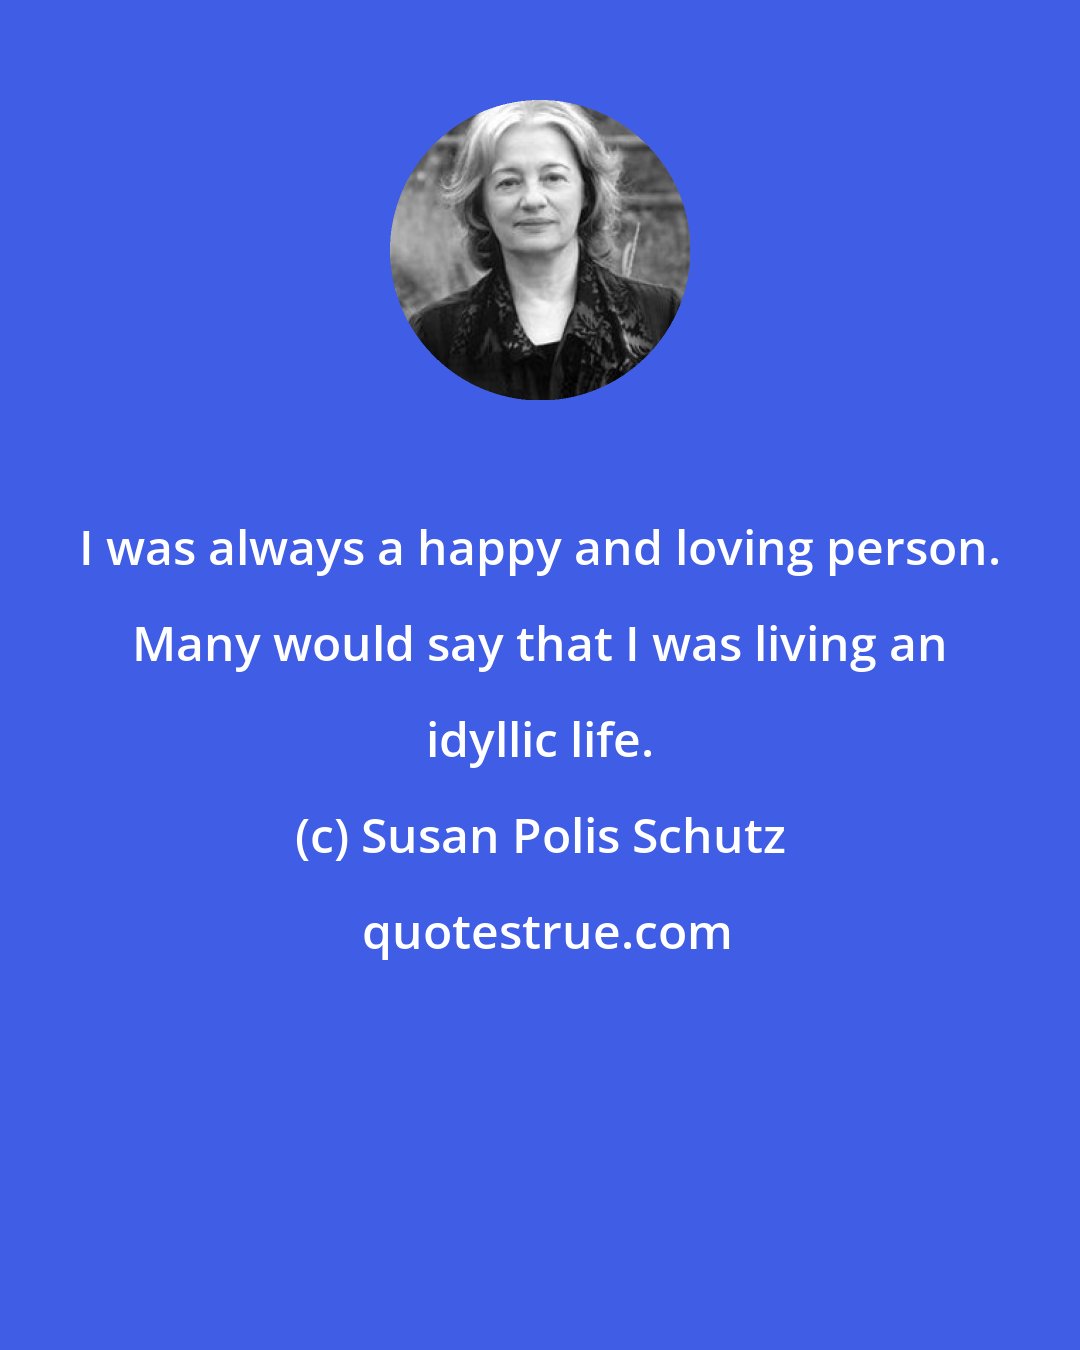 Susan Polis Schutz: I was always a happy and loving person. Many would say that I was living an idyllic life.